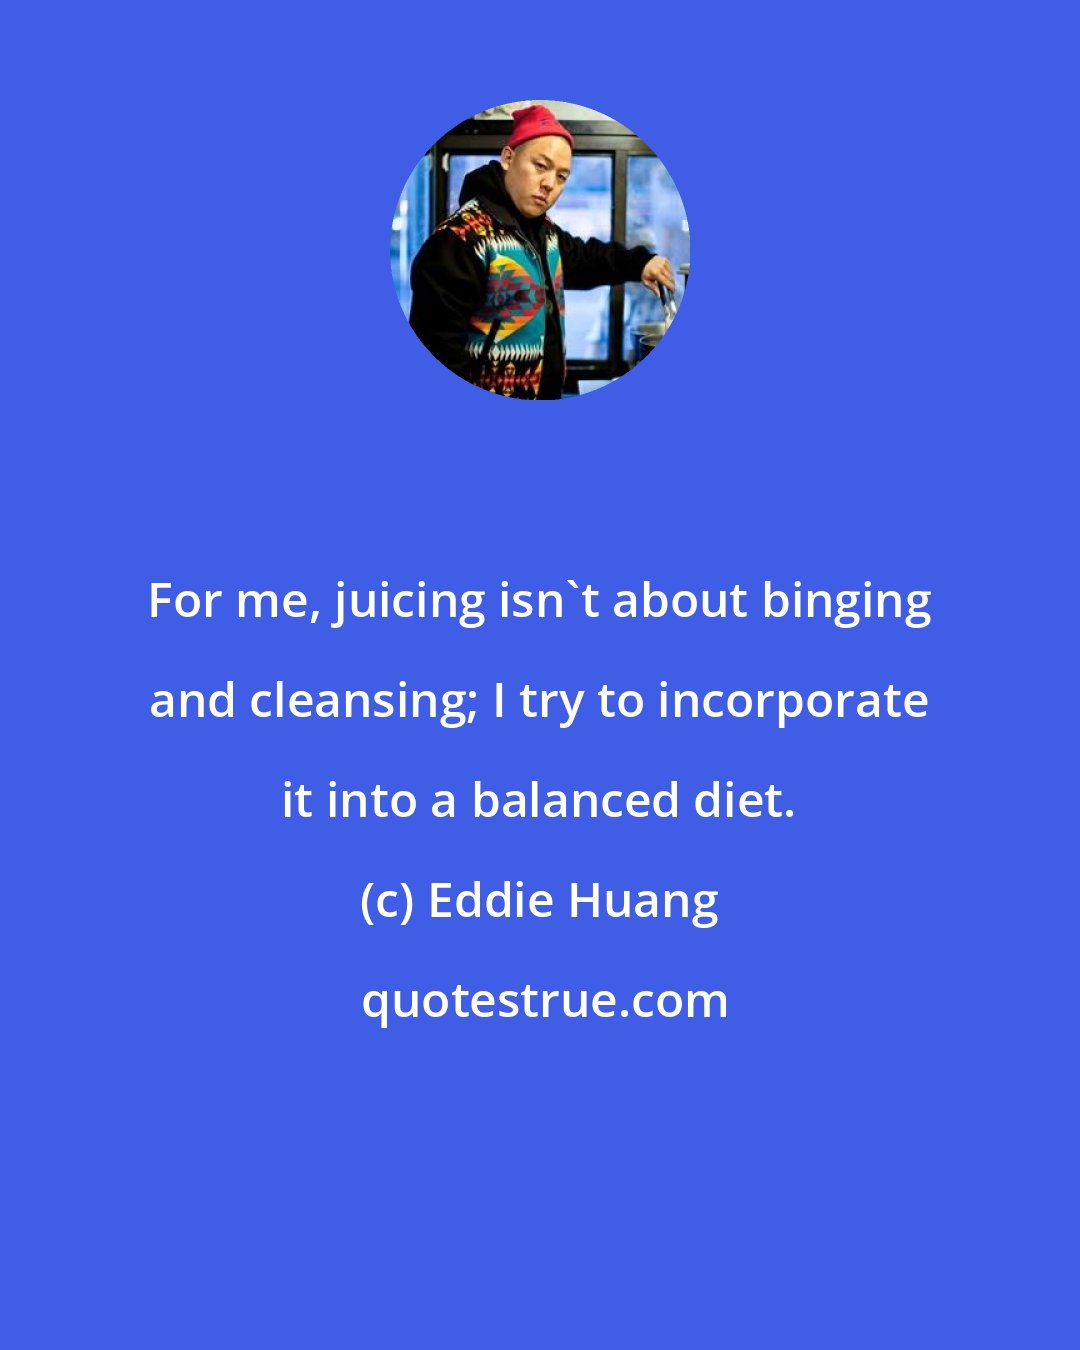 Eddie Huang: For me, juicing isn't about binging and cleansing; I try to incorporate it into a balanced diet.